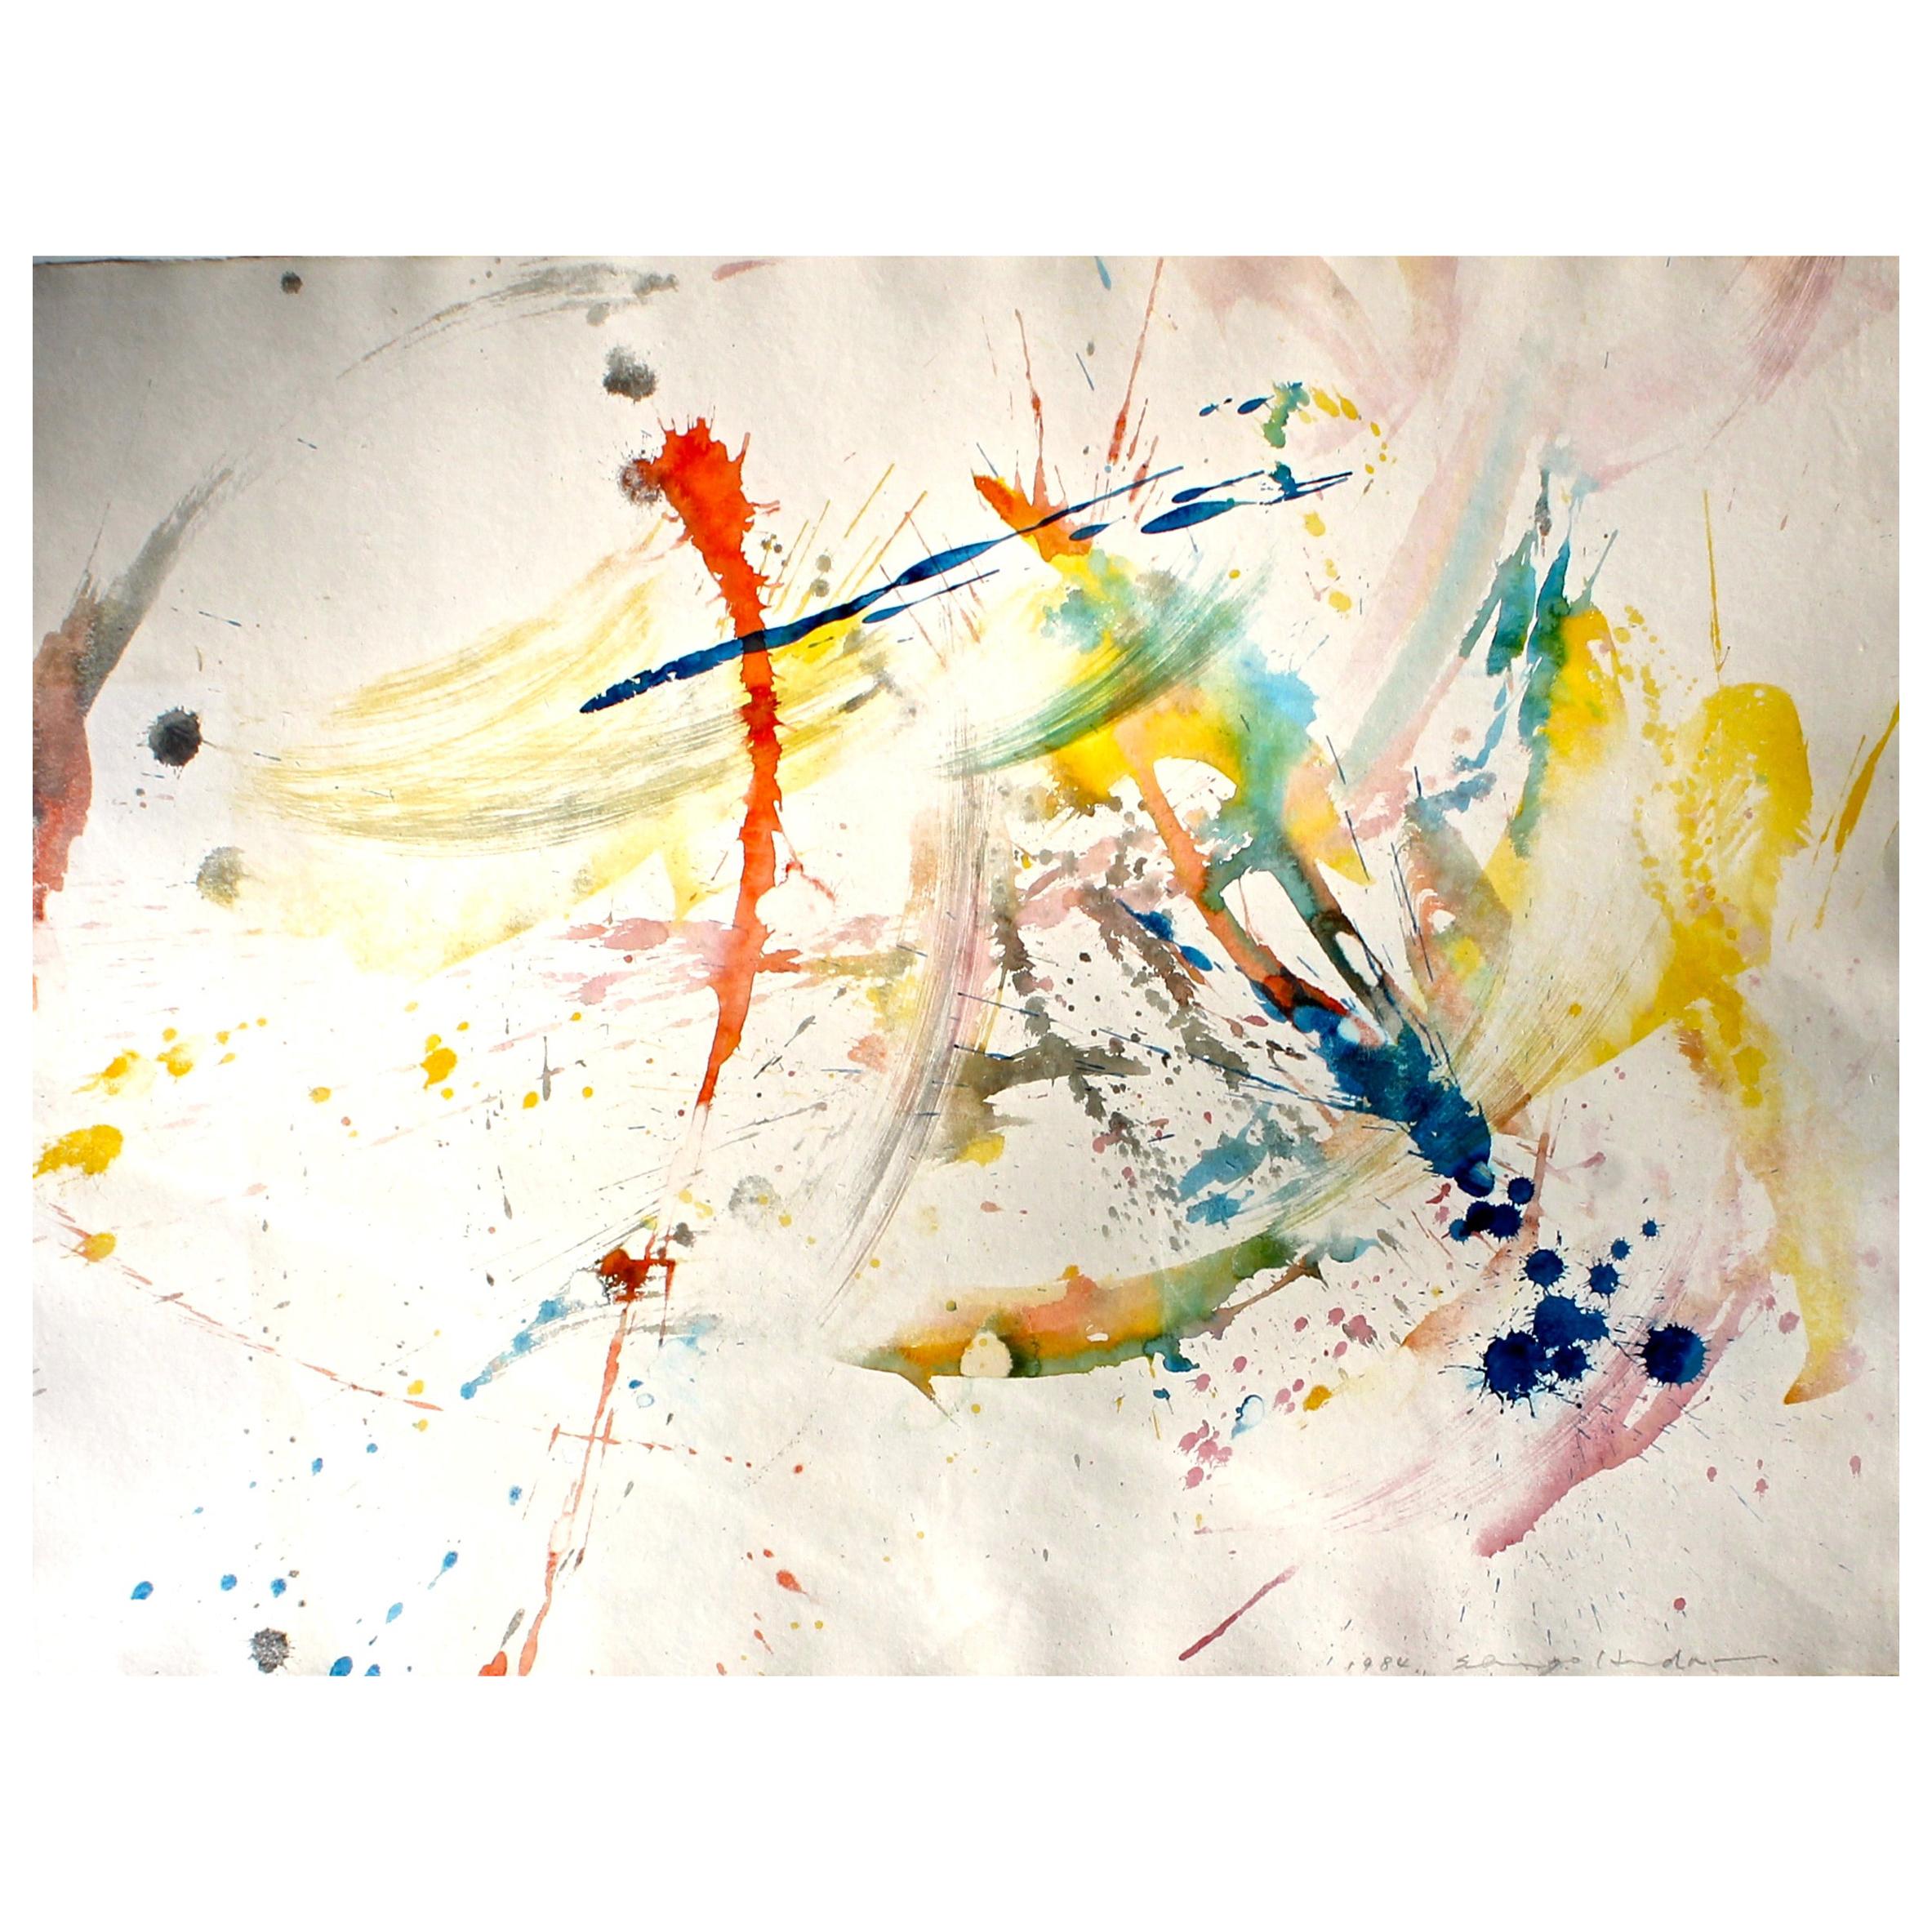 Shingo Honda  'To White Space' Series Abstract Expressionist Watercolor